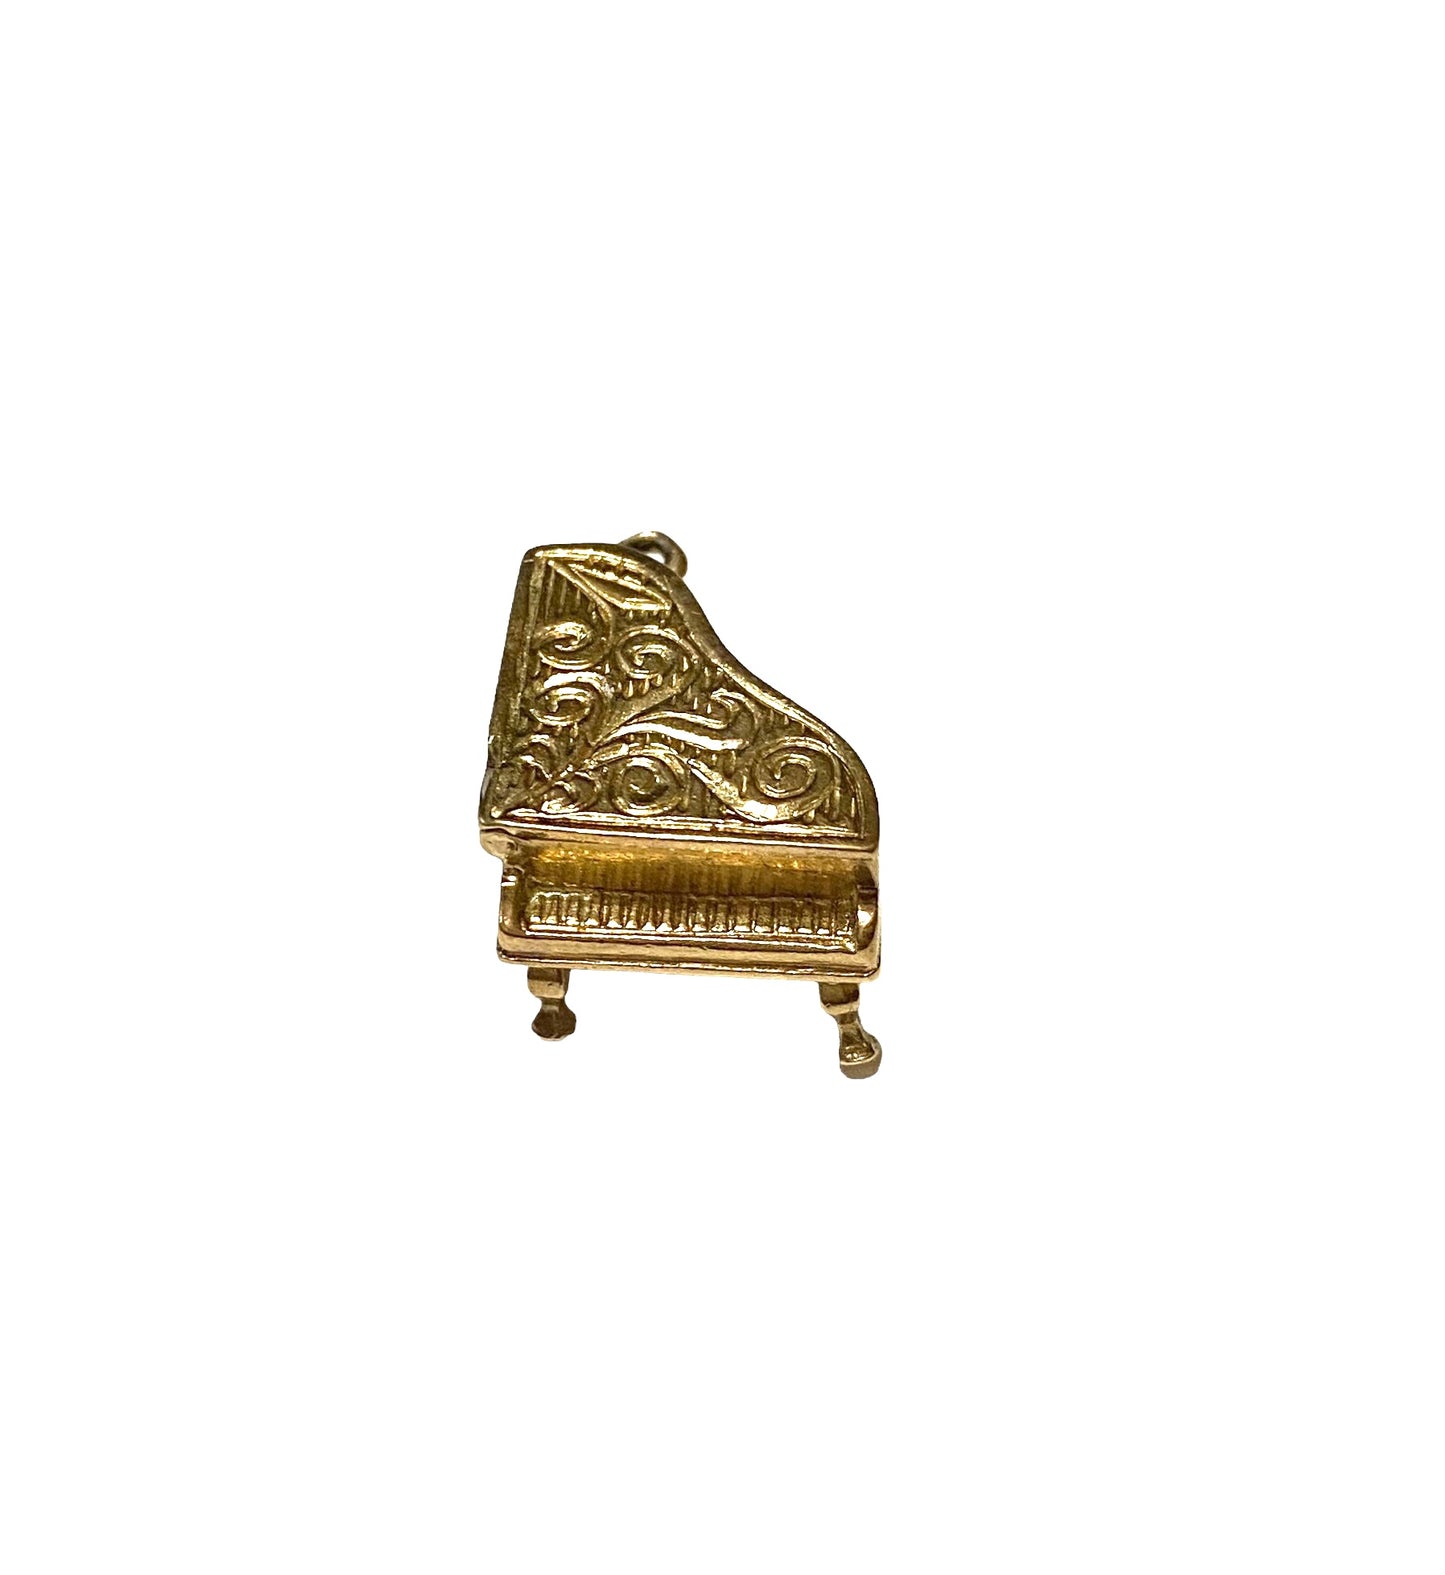 9ct vintage opening grand piano charm